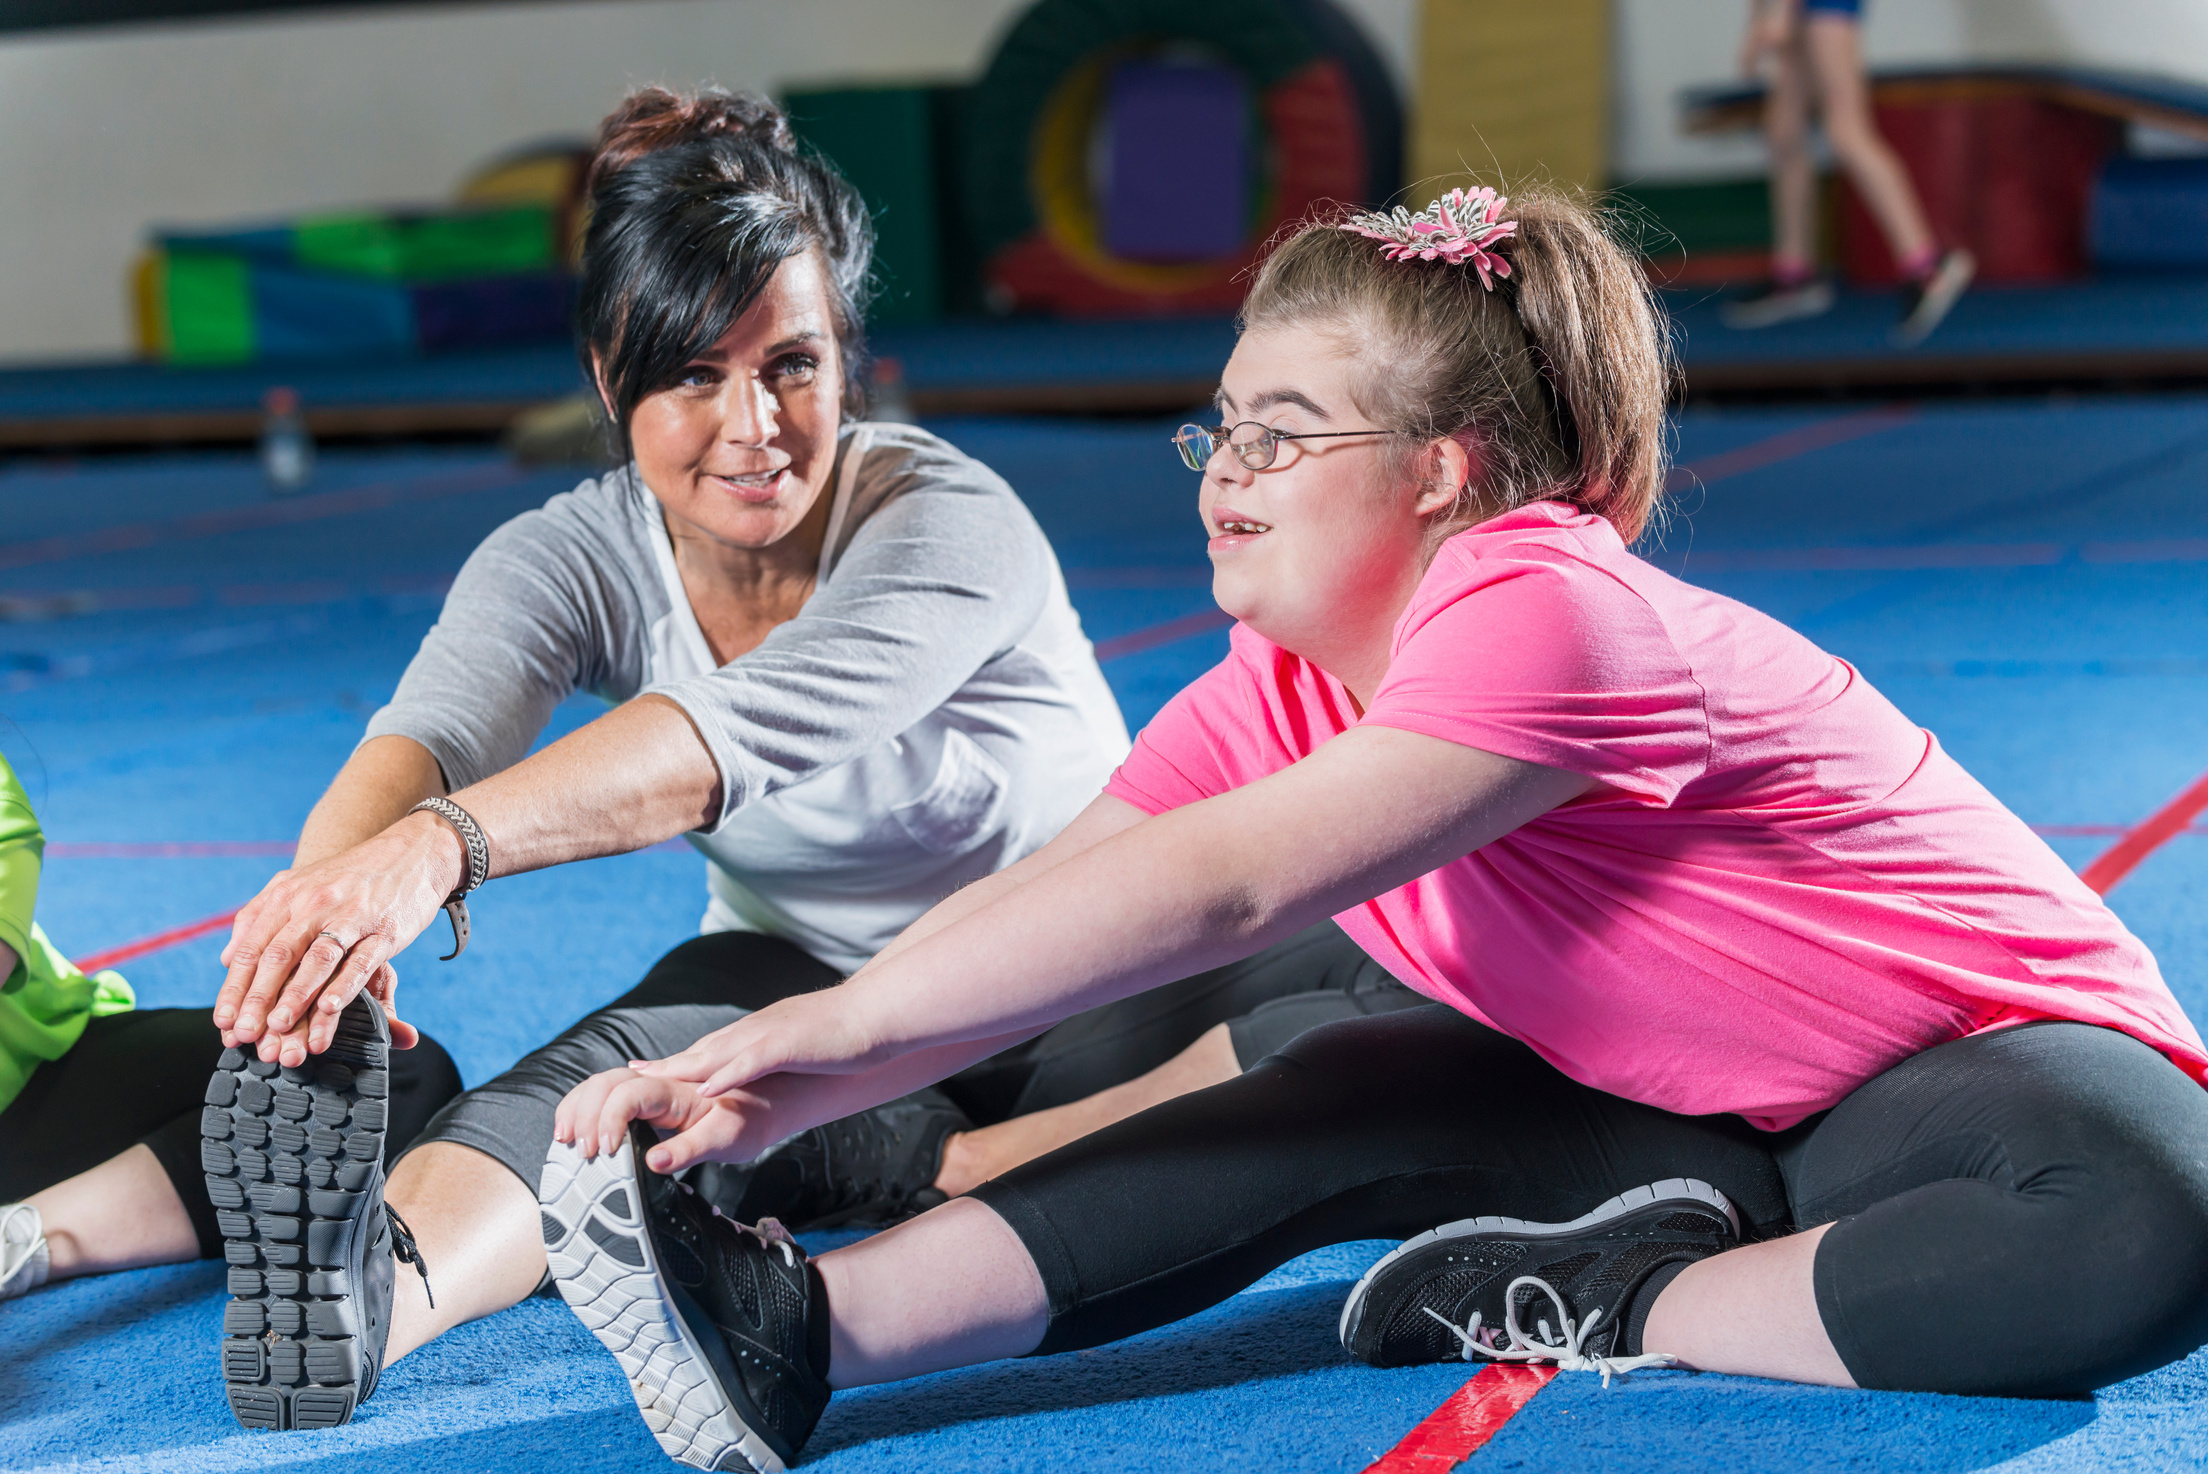 Teenage girl with down syndrome in exercise class